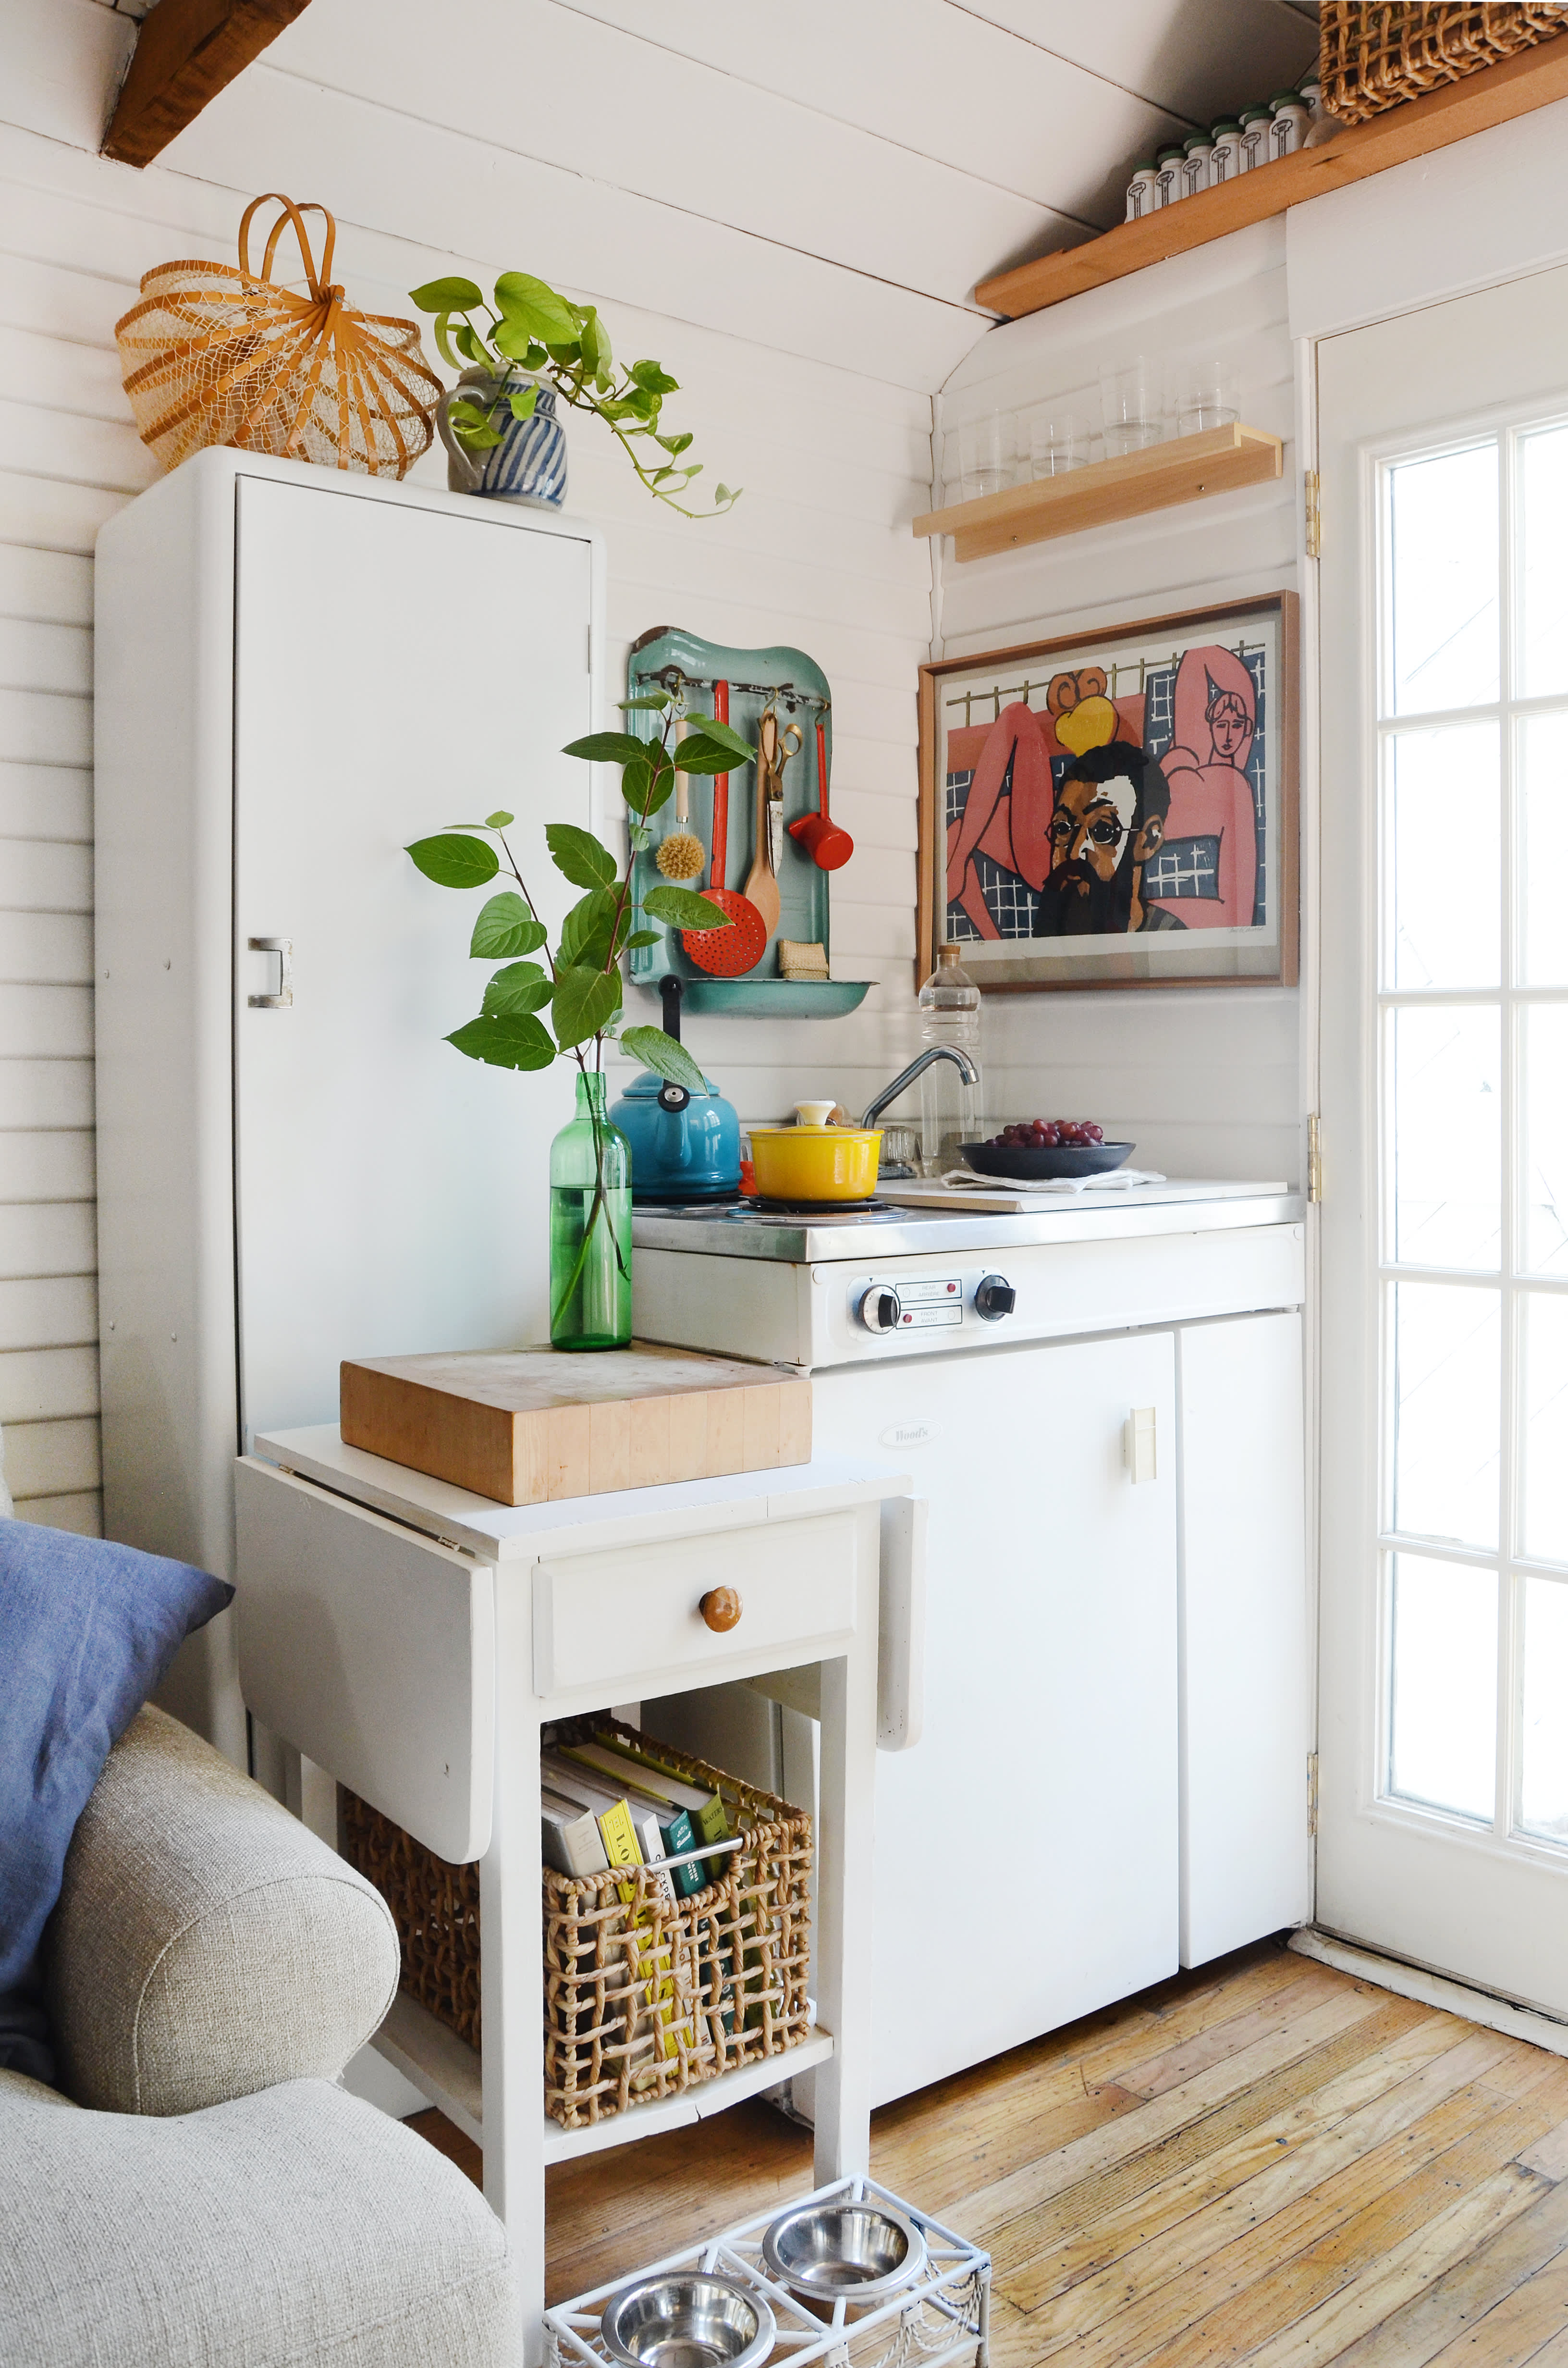 5 Ways to Create Counter Space in a Small Kitchen